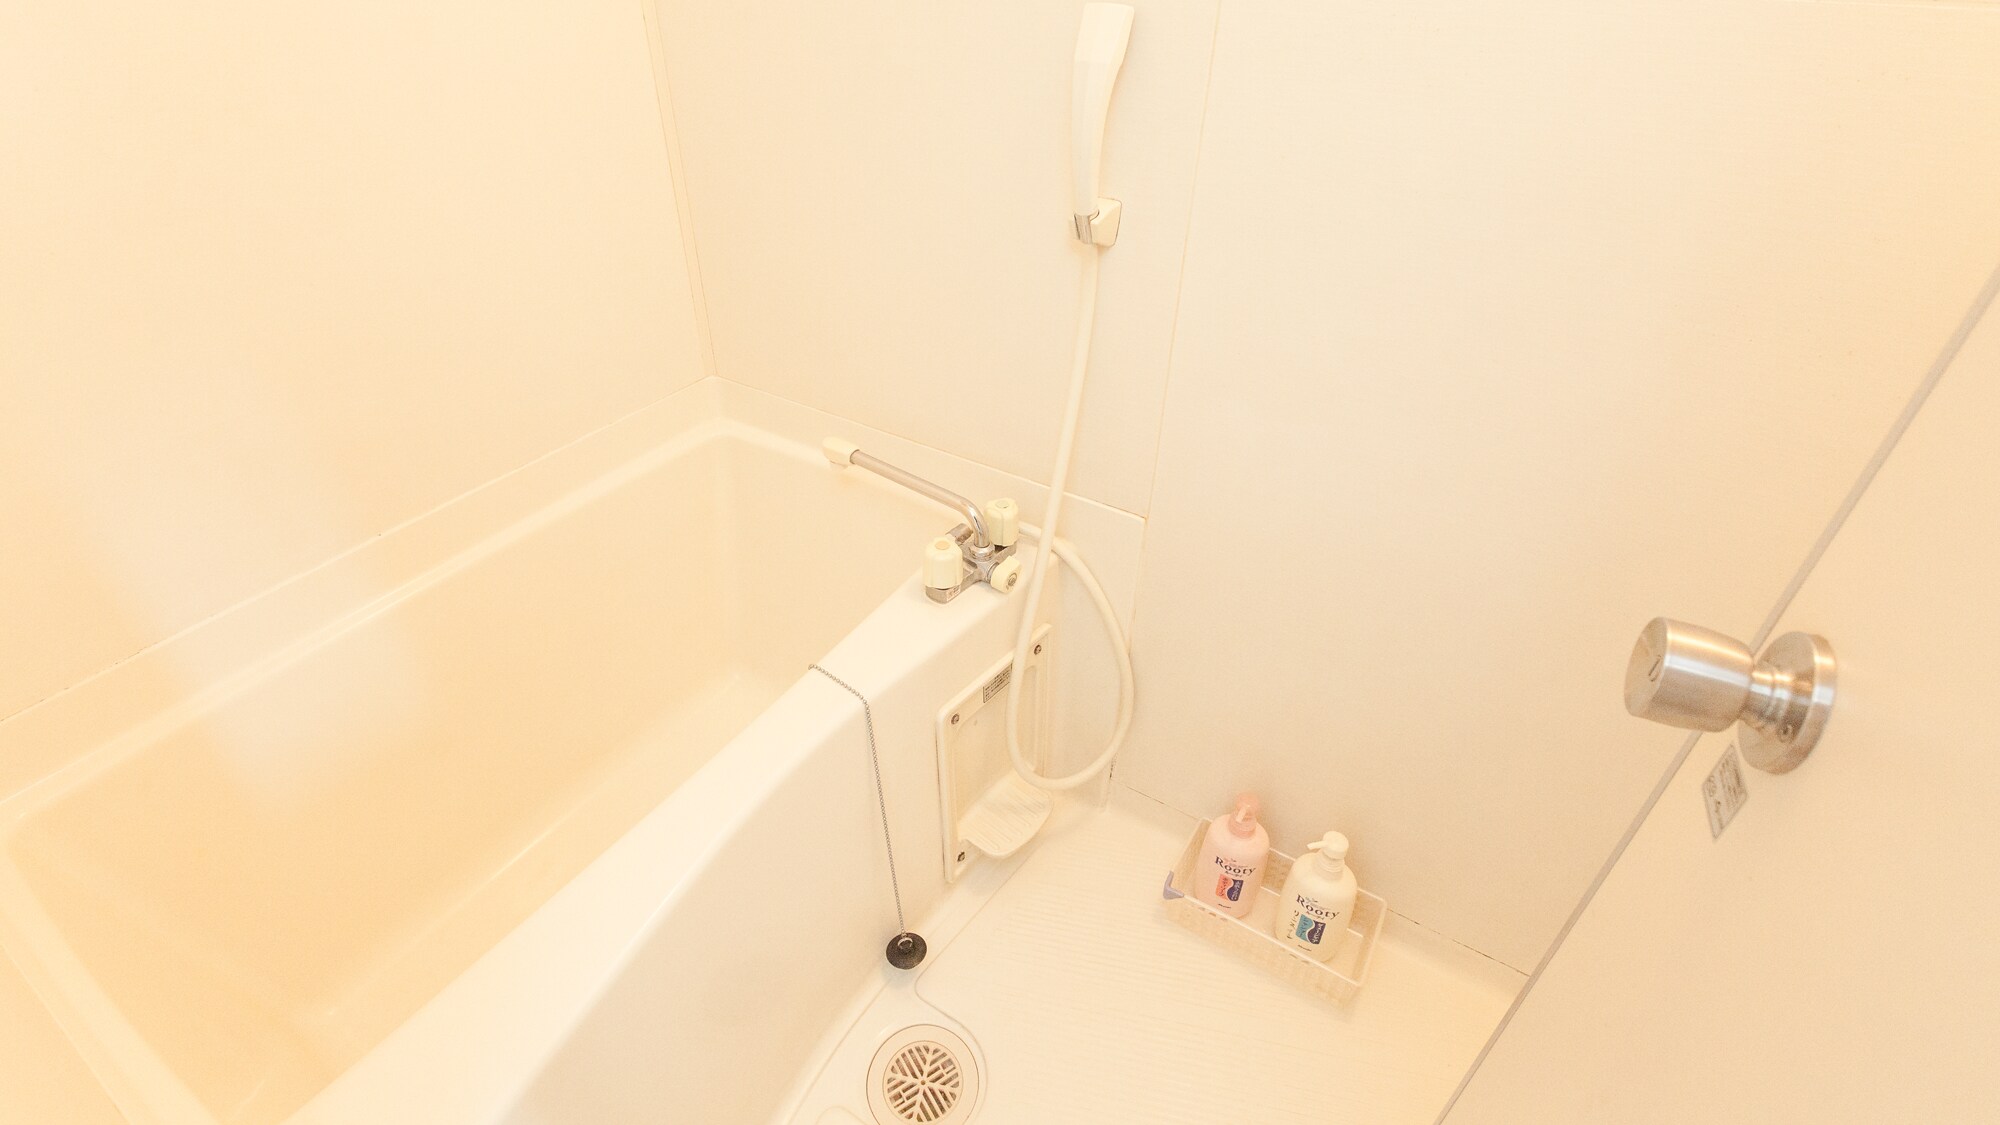 Bathrooms of various room types (separate type with separate bath and toilet)